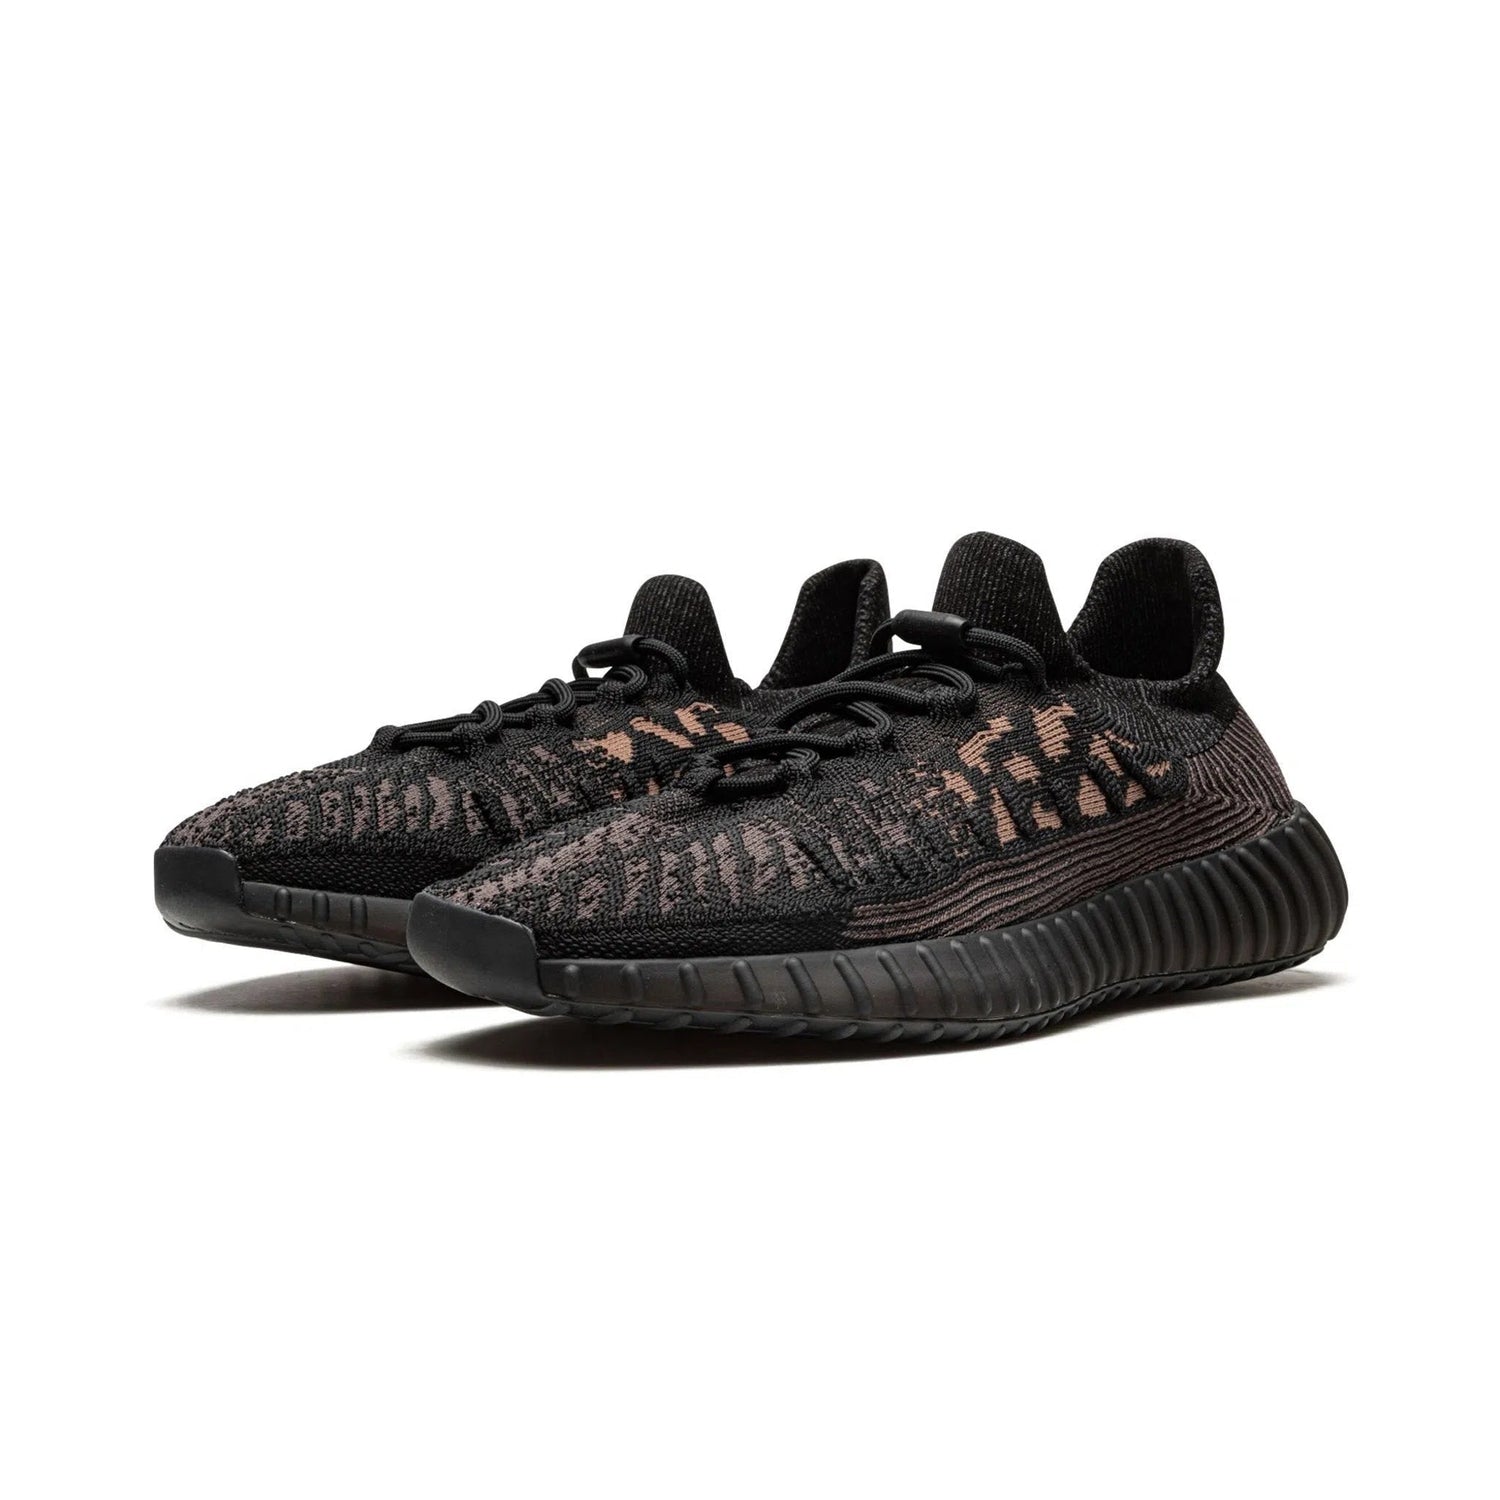 Yeezy Boost 350 V2 - CMPCT Slate Carbon-LOTABY